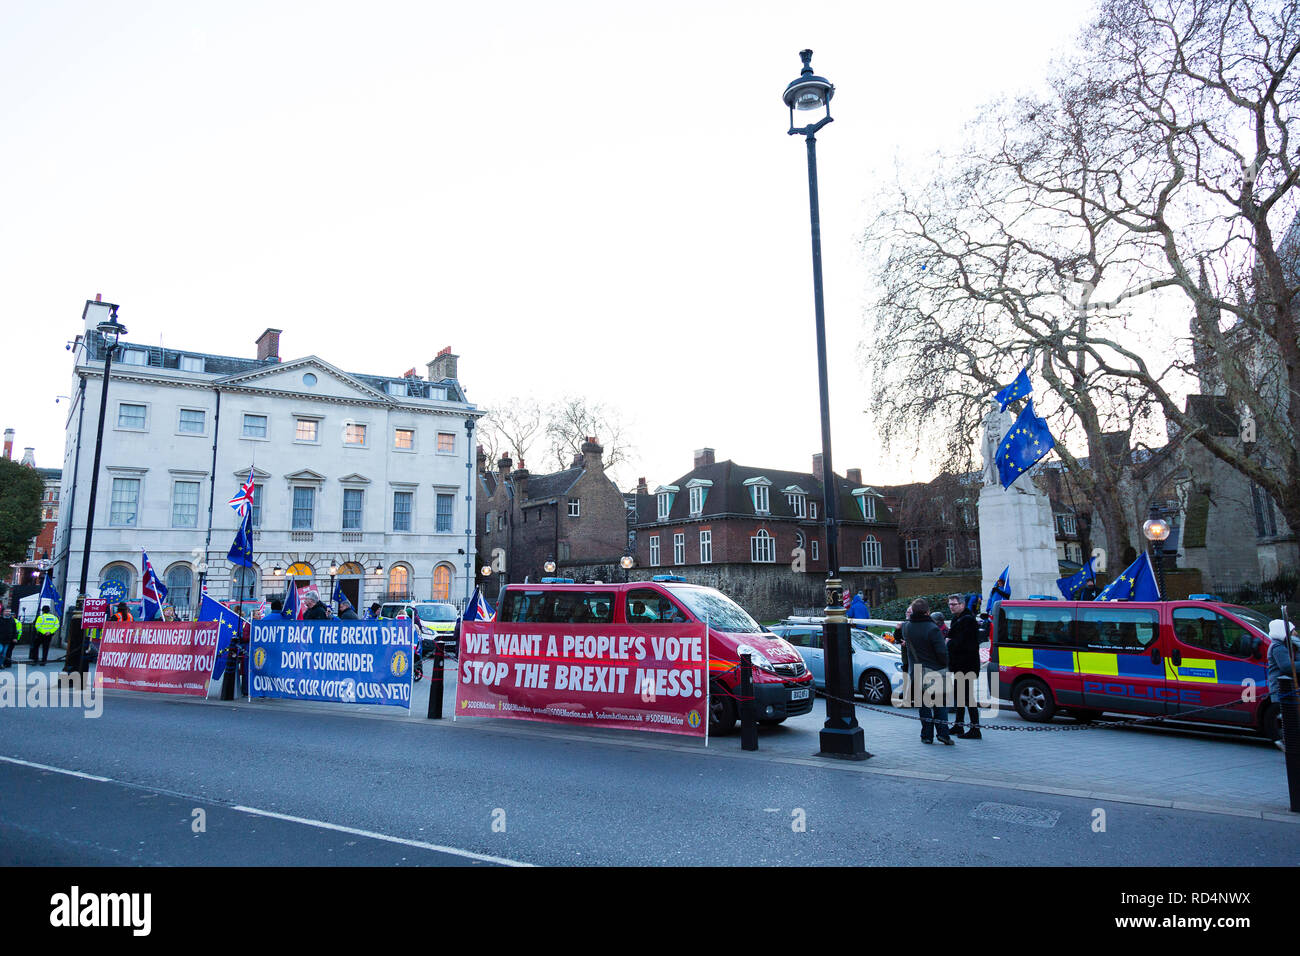 London, UK. 17th Jan, 2019. LONDON, UK. Large hoardings protesting against leaving the EU along the road opposite the Houses of Parliament. Credit: Dave Stevenson/Alamy Live News Stock Photo